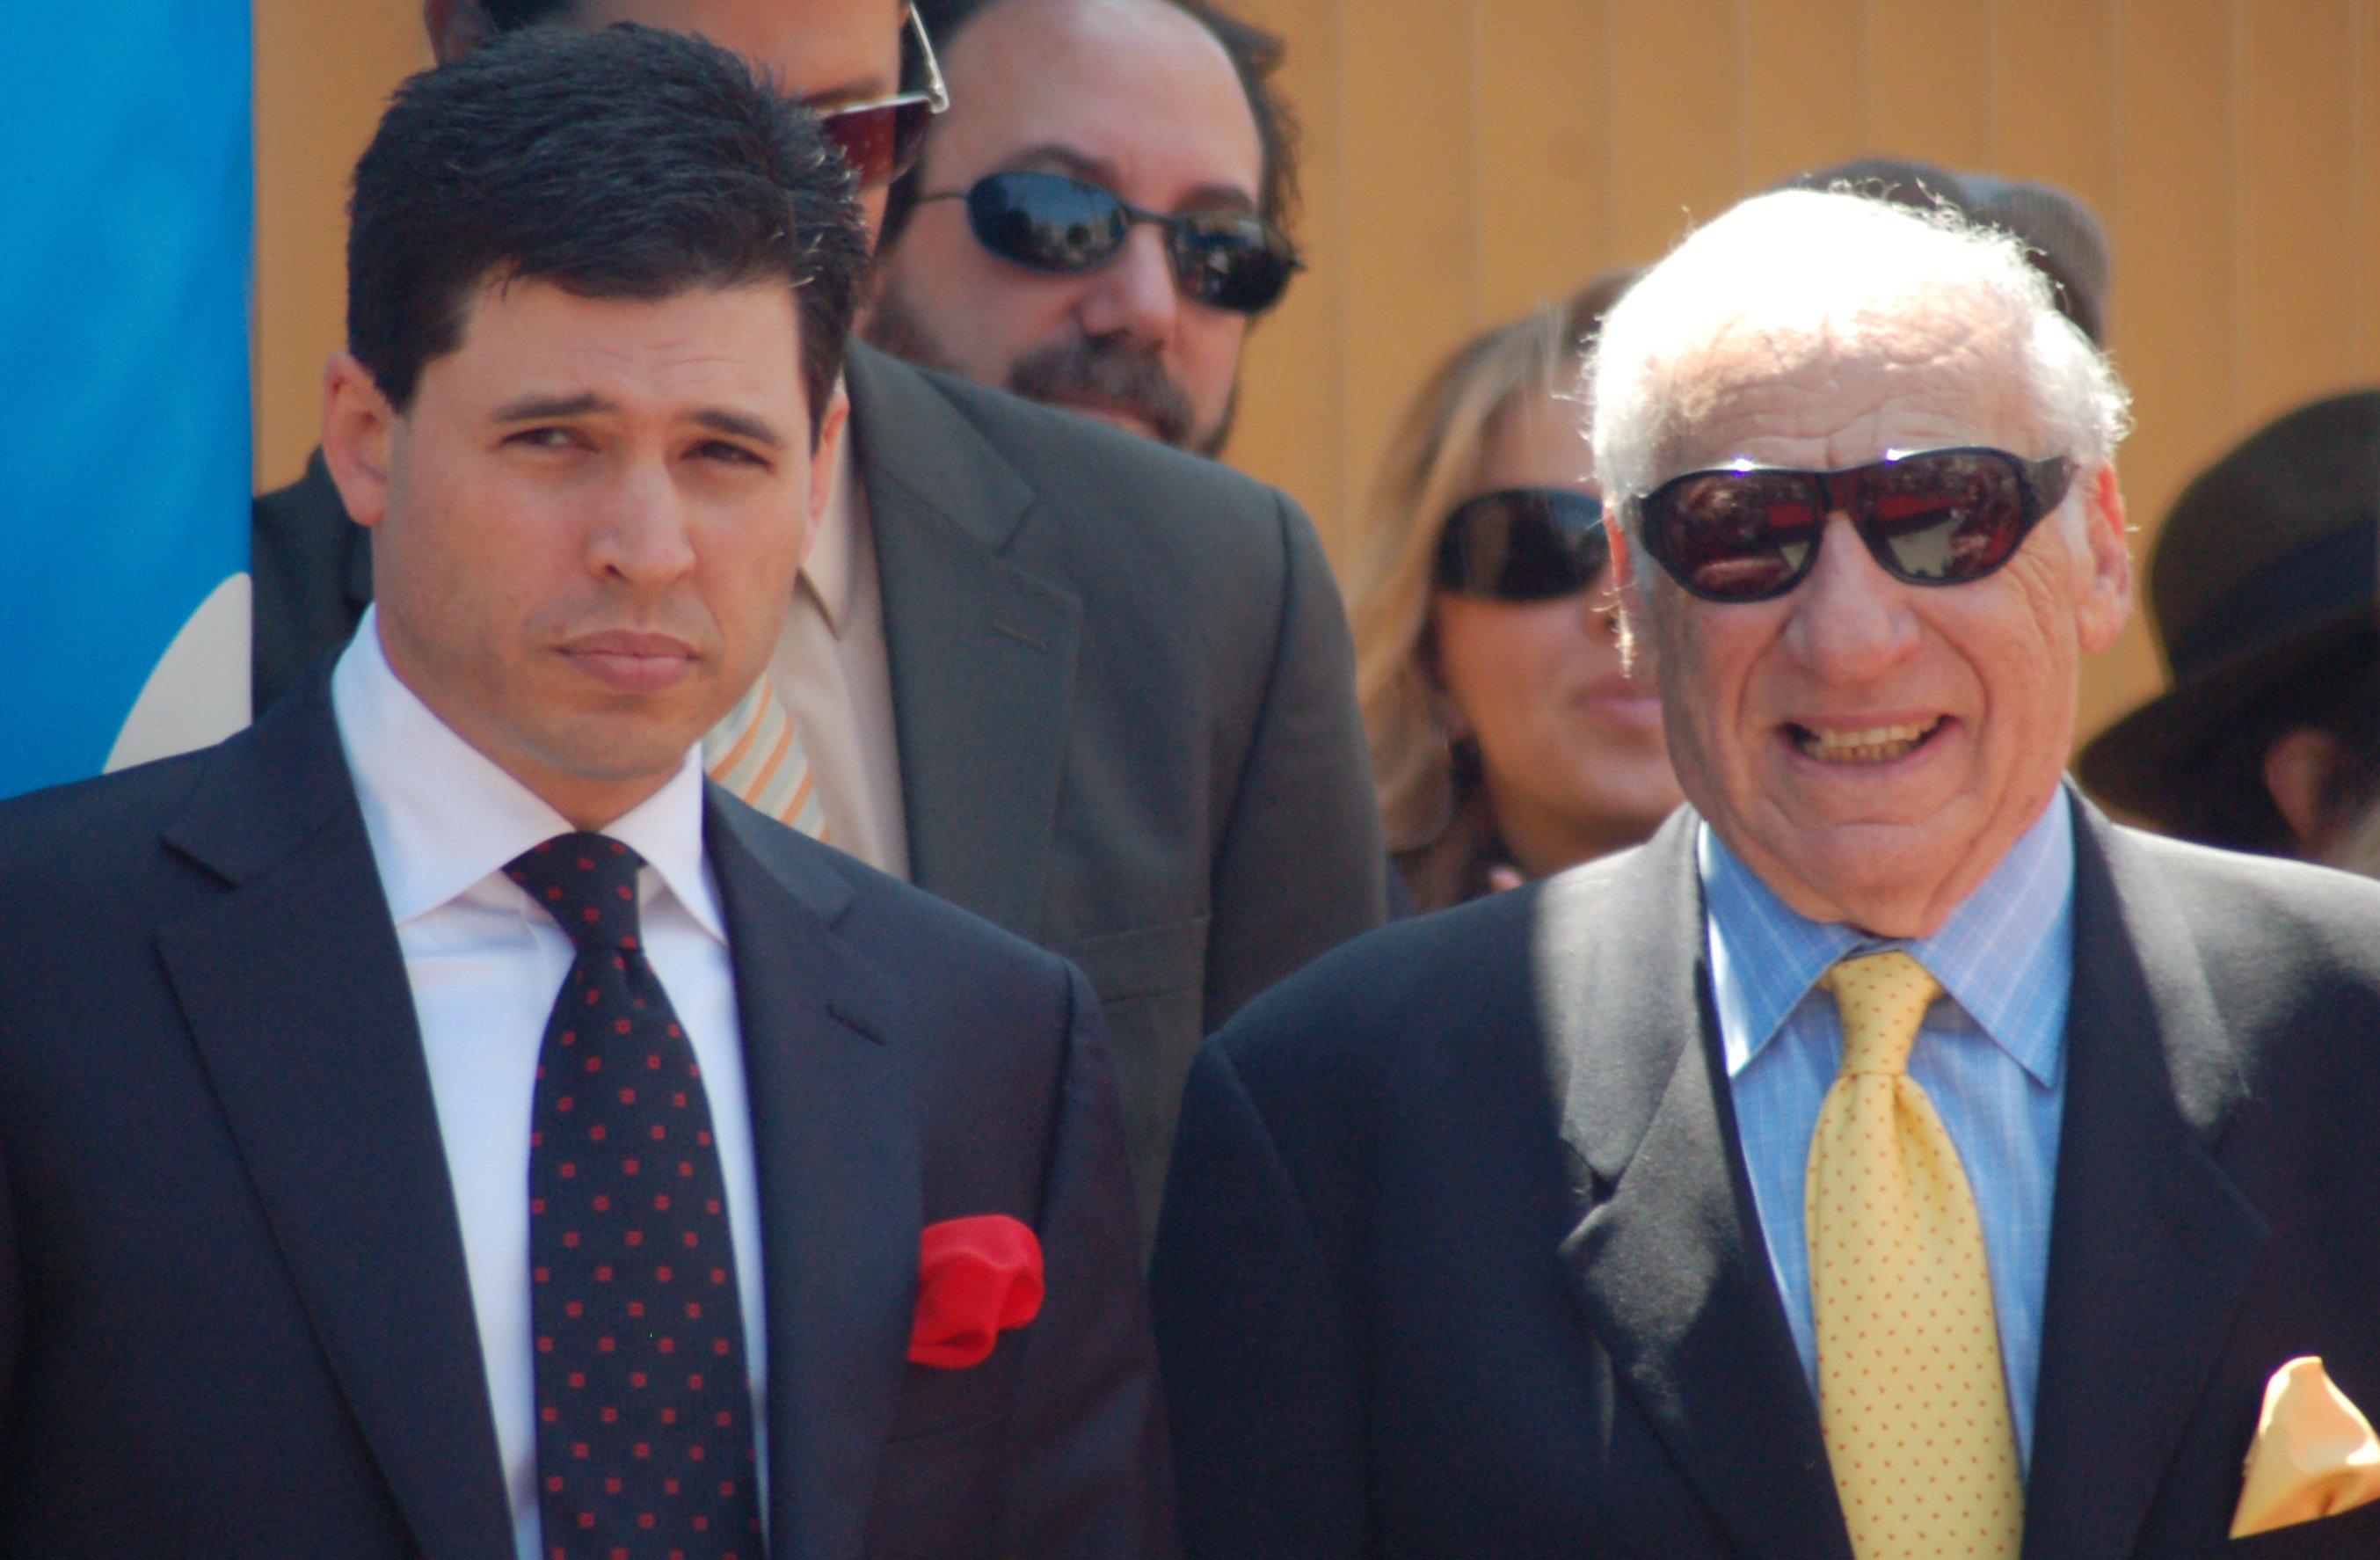 Max and Mel Brooks at a ceremony for Mel to receive a star on the Hollywood Walk of Fame on 23 April 2010. | Source: Wikimedia Commons